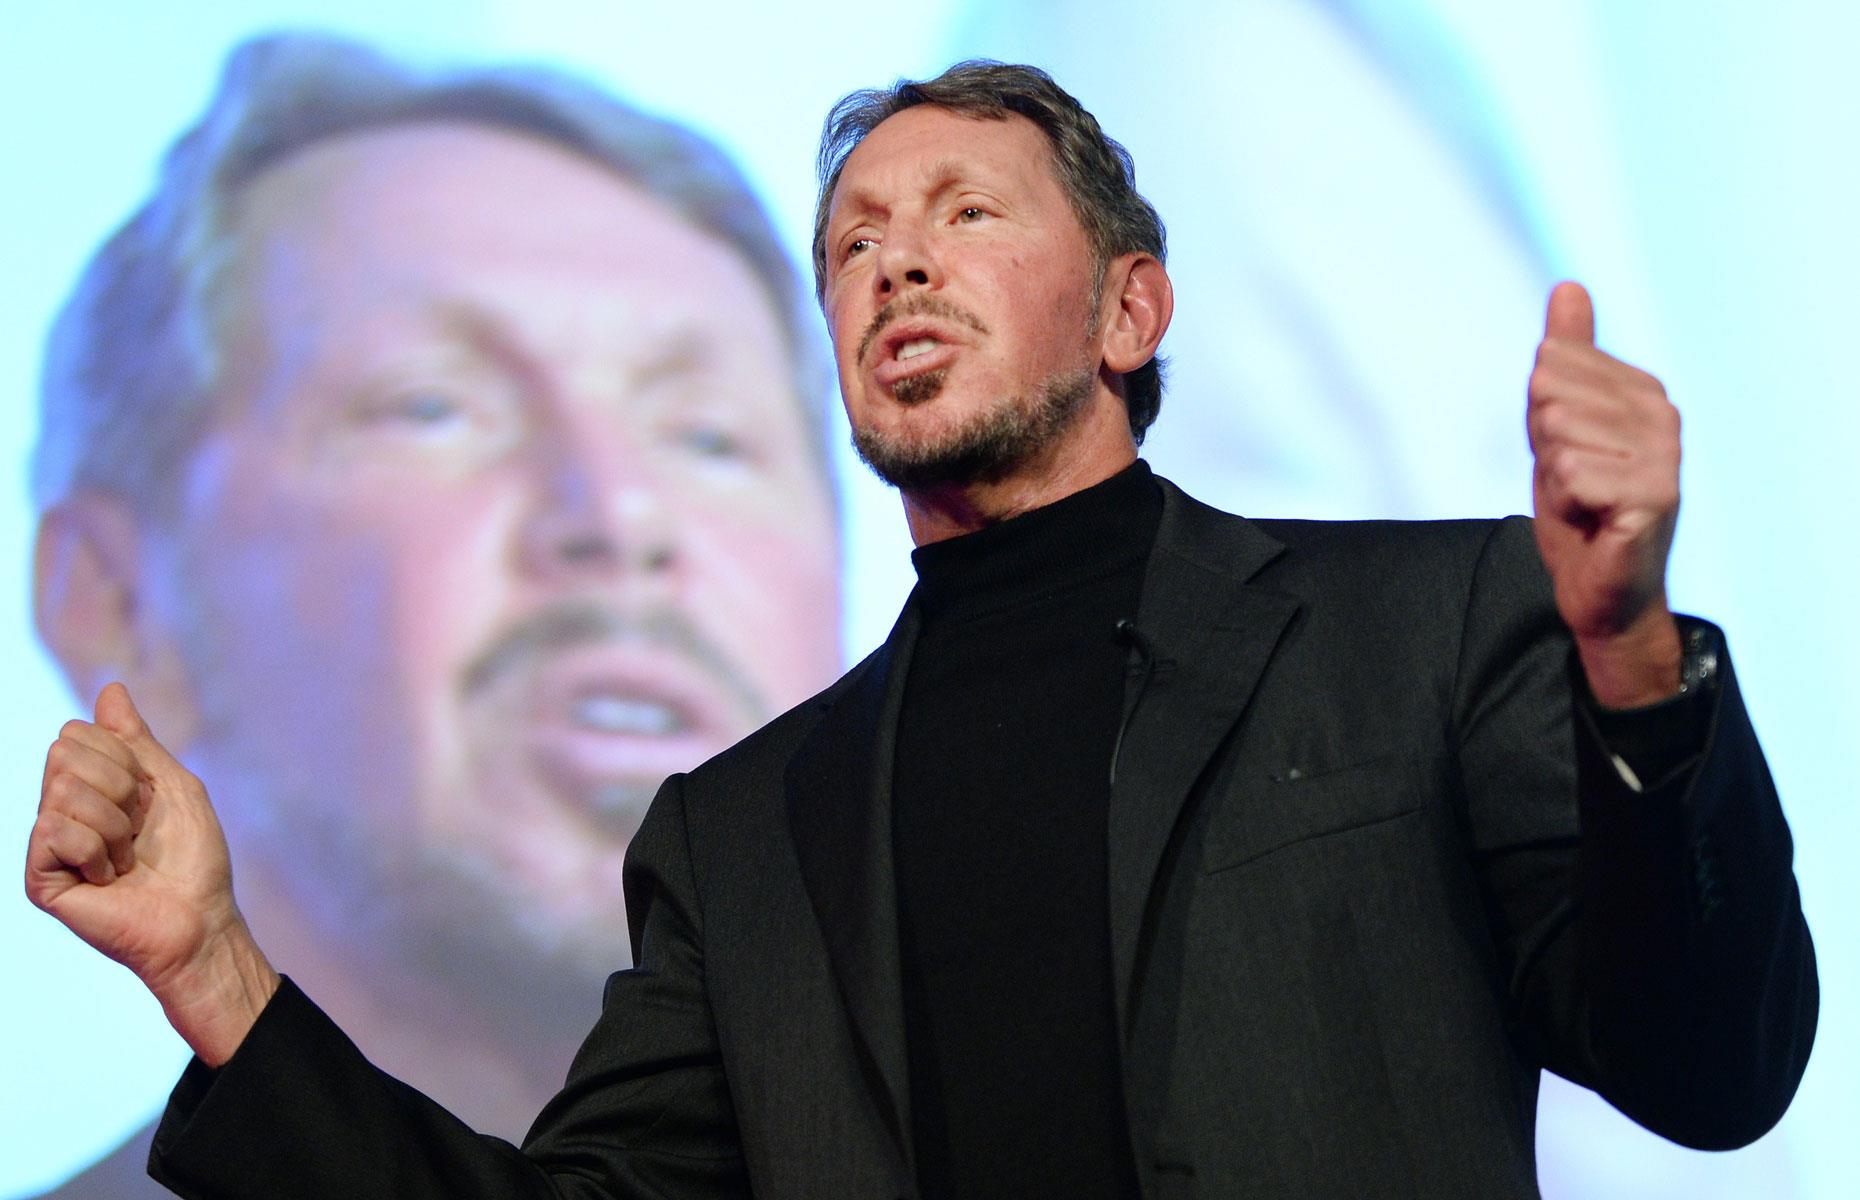 Larry Ellison's rise to fame and fortune